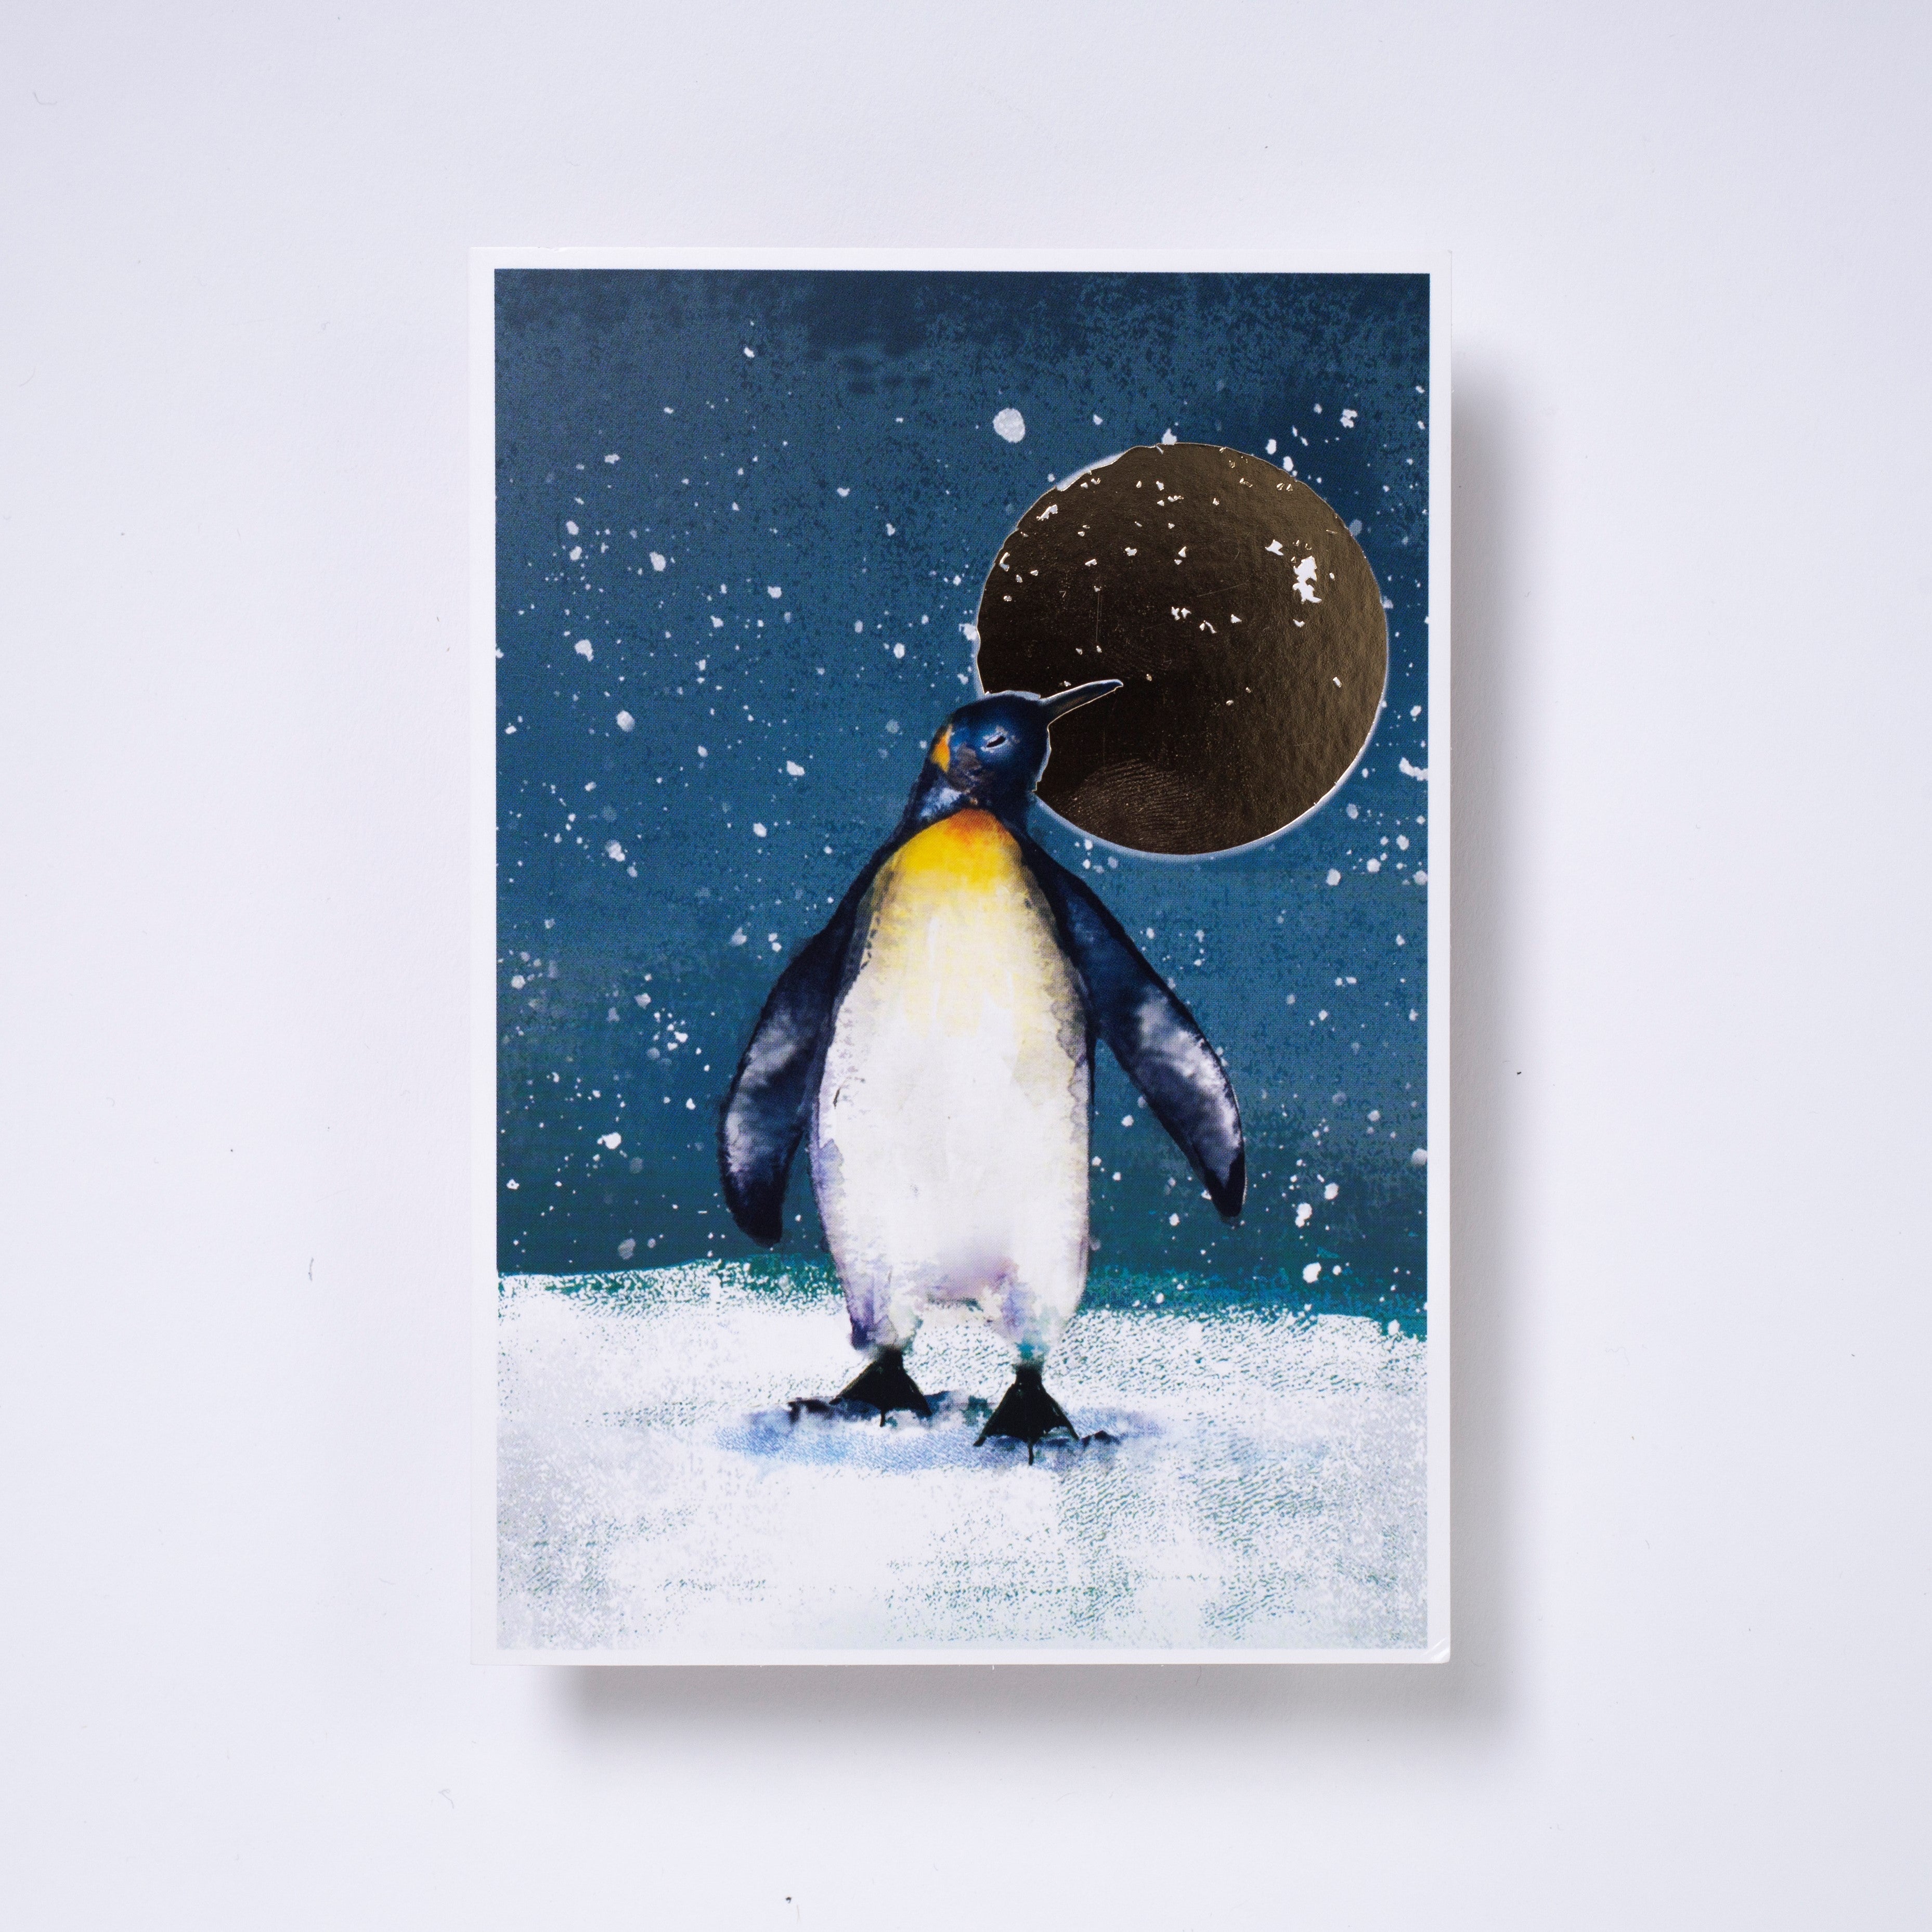 Moonlit penguin - pack of 10 charity Christmas cards with envelopes